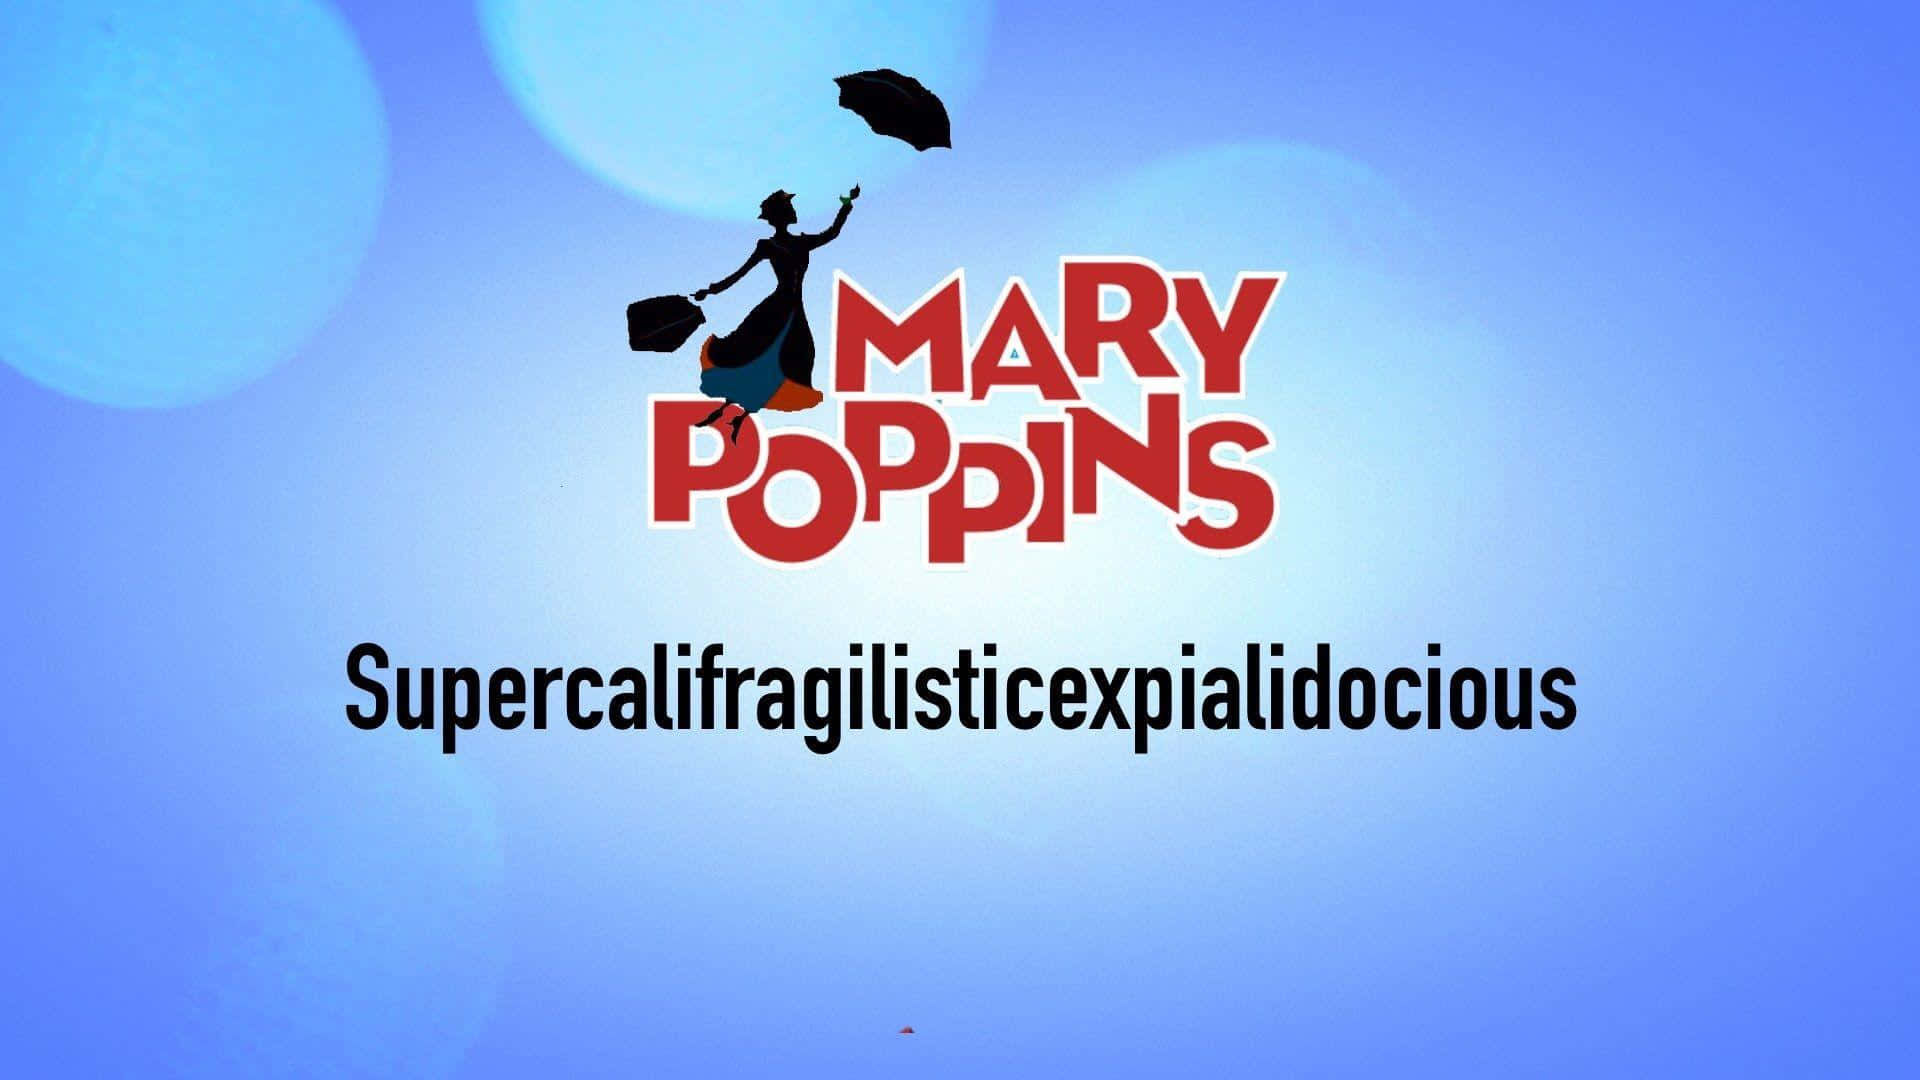 Mary Poppins Soars Over London